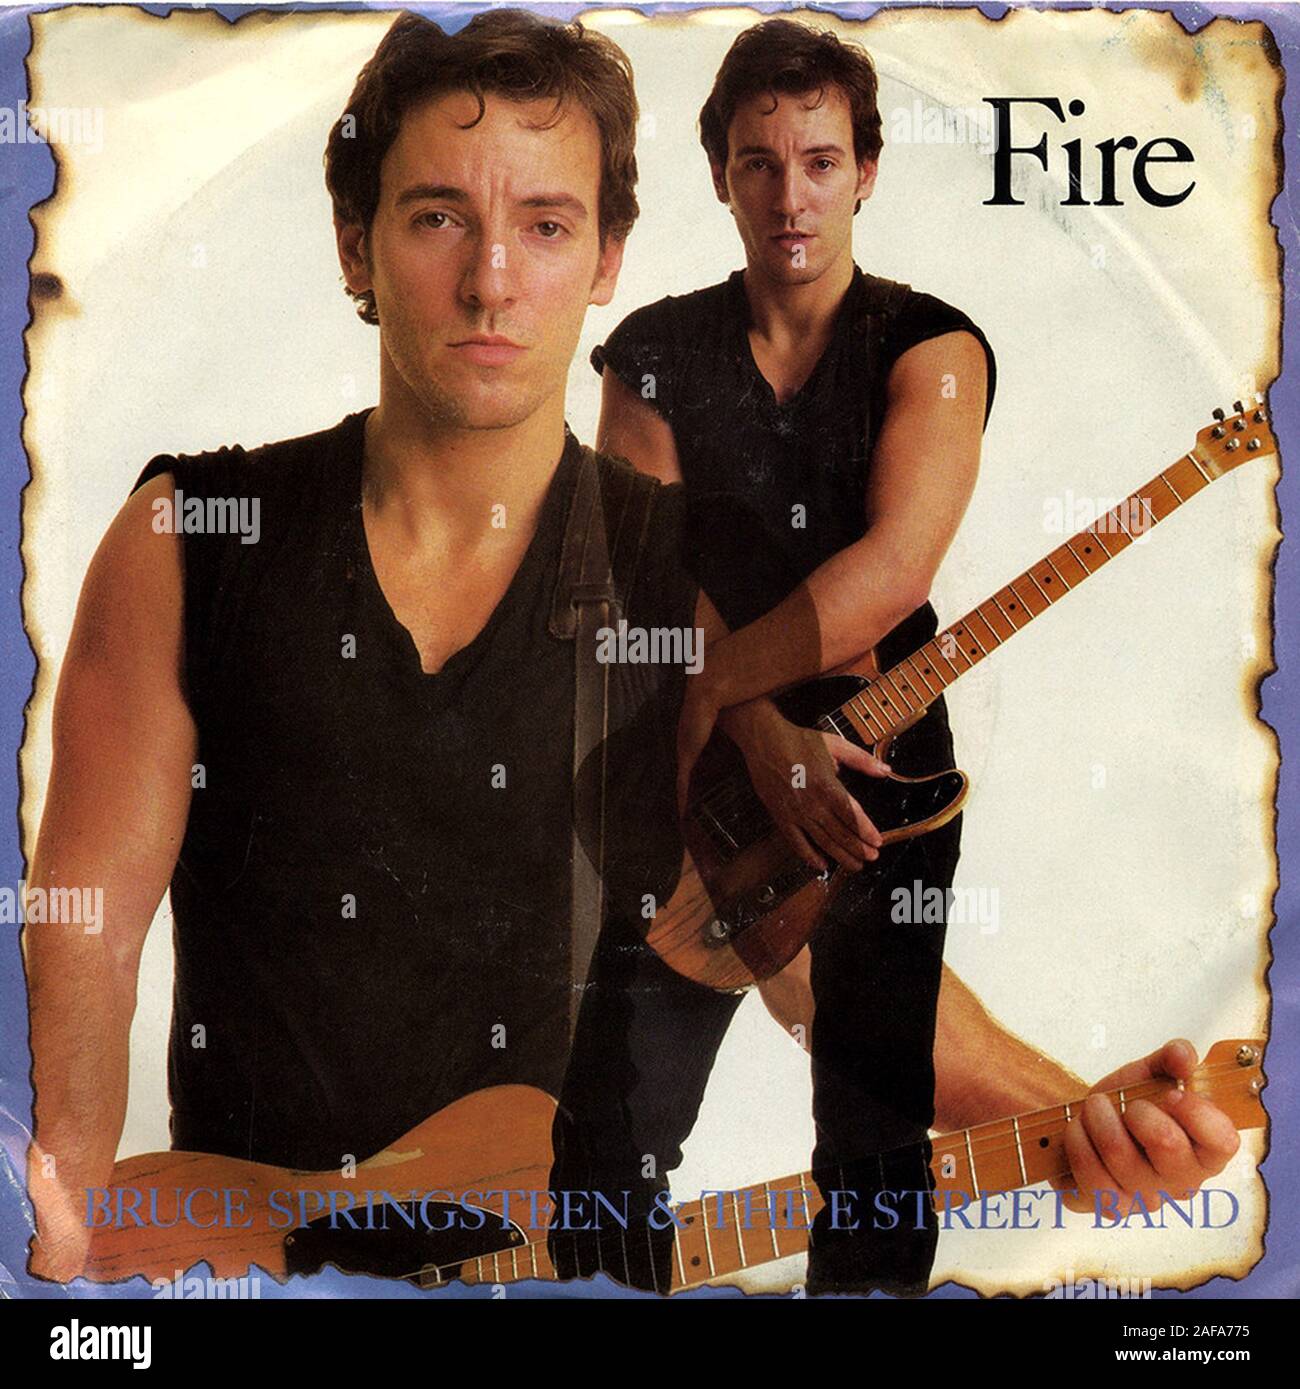 Bruce Springsteen and the E Street Band - Fire - Vintage vinyl record cover Stock Photo